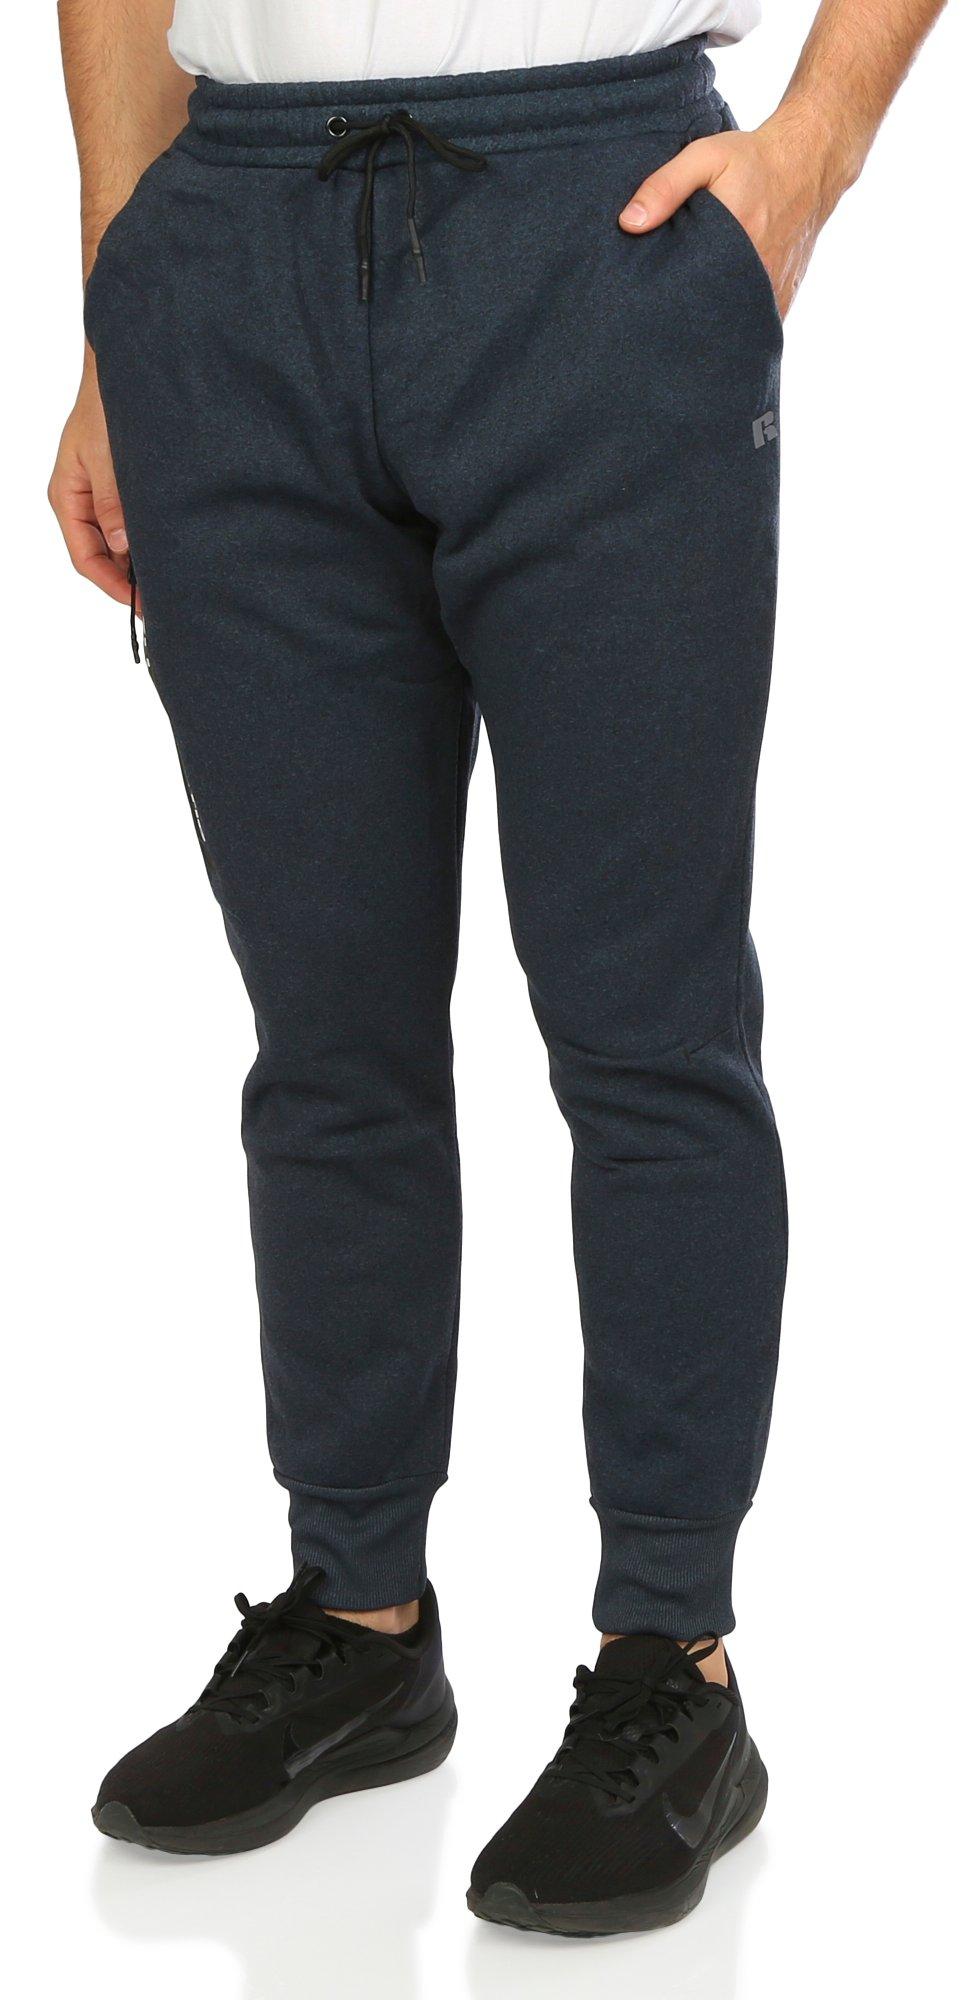 Men's Active Heathered Joggers - Charcoal